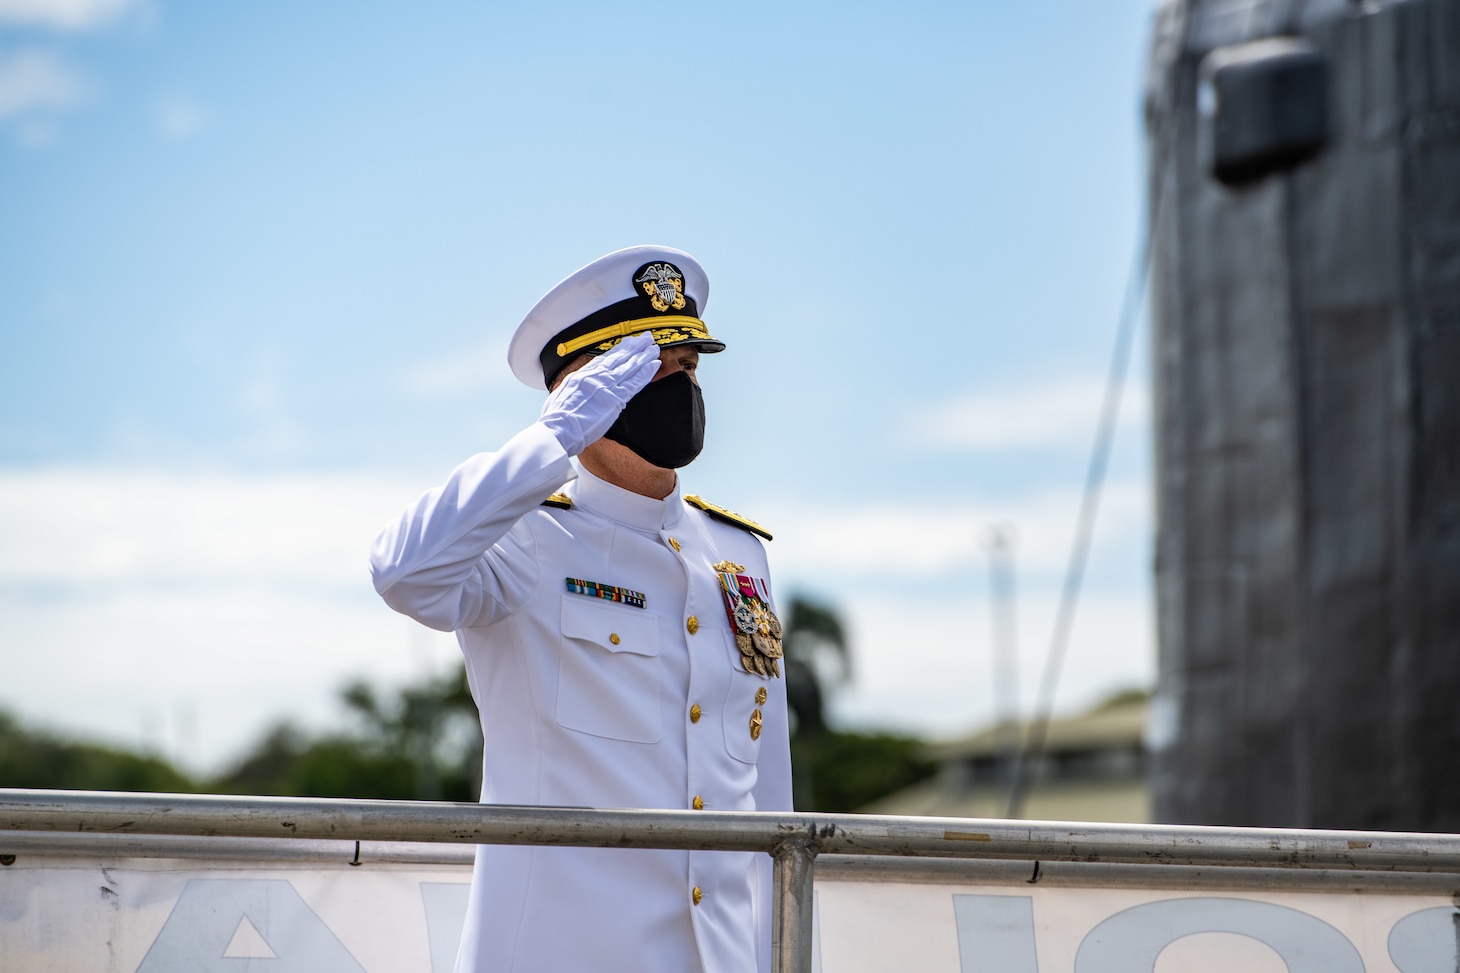 JOINT BASE PEARL HARBOR-HICKAM (April 29, 2021) -- Rear Adm. Jeffrey Jablon, from Frostburg, Maryland, salutes the ensign as he crosses the brow of the Virginia-class fast-attack submarine USS North Carolina (SSN 777) during the change of command ceremony for Commander, Submarine Force, U.S. Pacific Fleet. Jablon relieved Rear Adm. Blake Converse, from Montoursville, Pennsylvania, as the 43rd commander, Submarine Force, U.S. Pacific Fleet, at the ceremony held on the historic submarine piers on Joint Base Pearl Harbor-Hickam. (U.S. Navy photo by MC1 Michael B. Zingaro/Released)